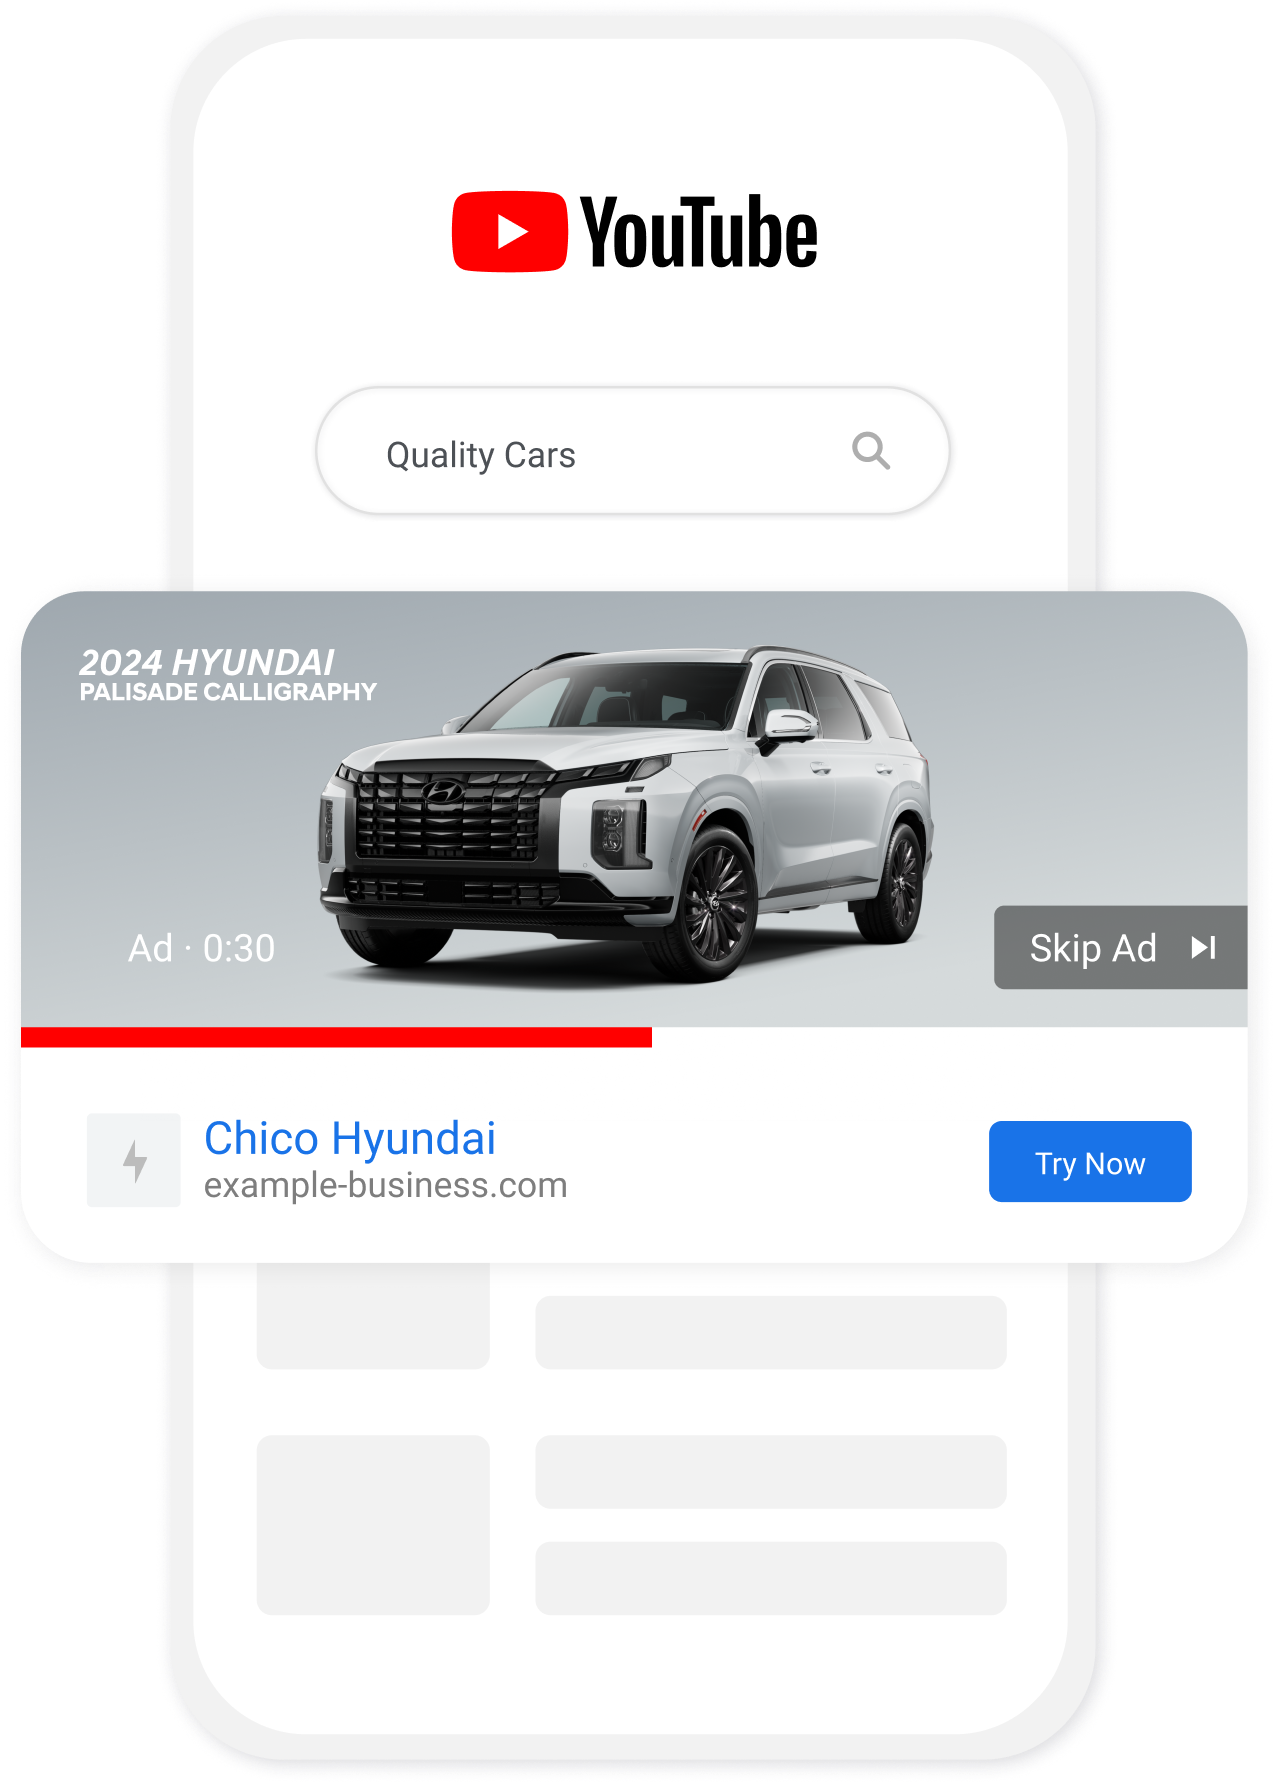 Illustration of Hyundai ad on YouTube with targeted advertising and call to action.